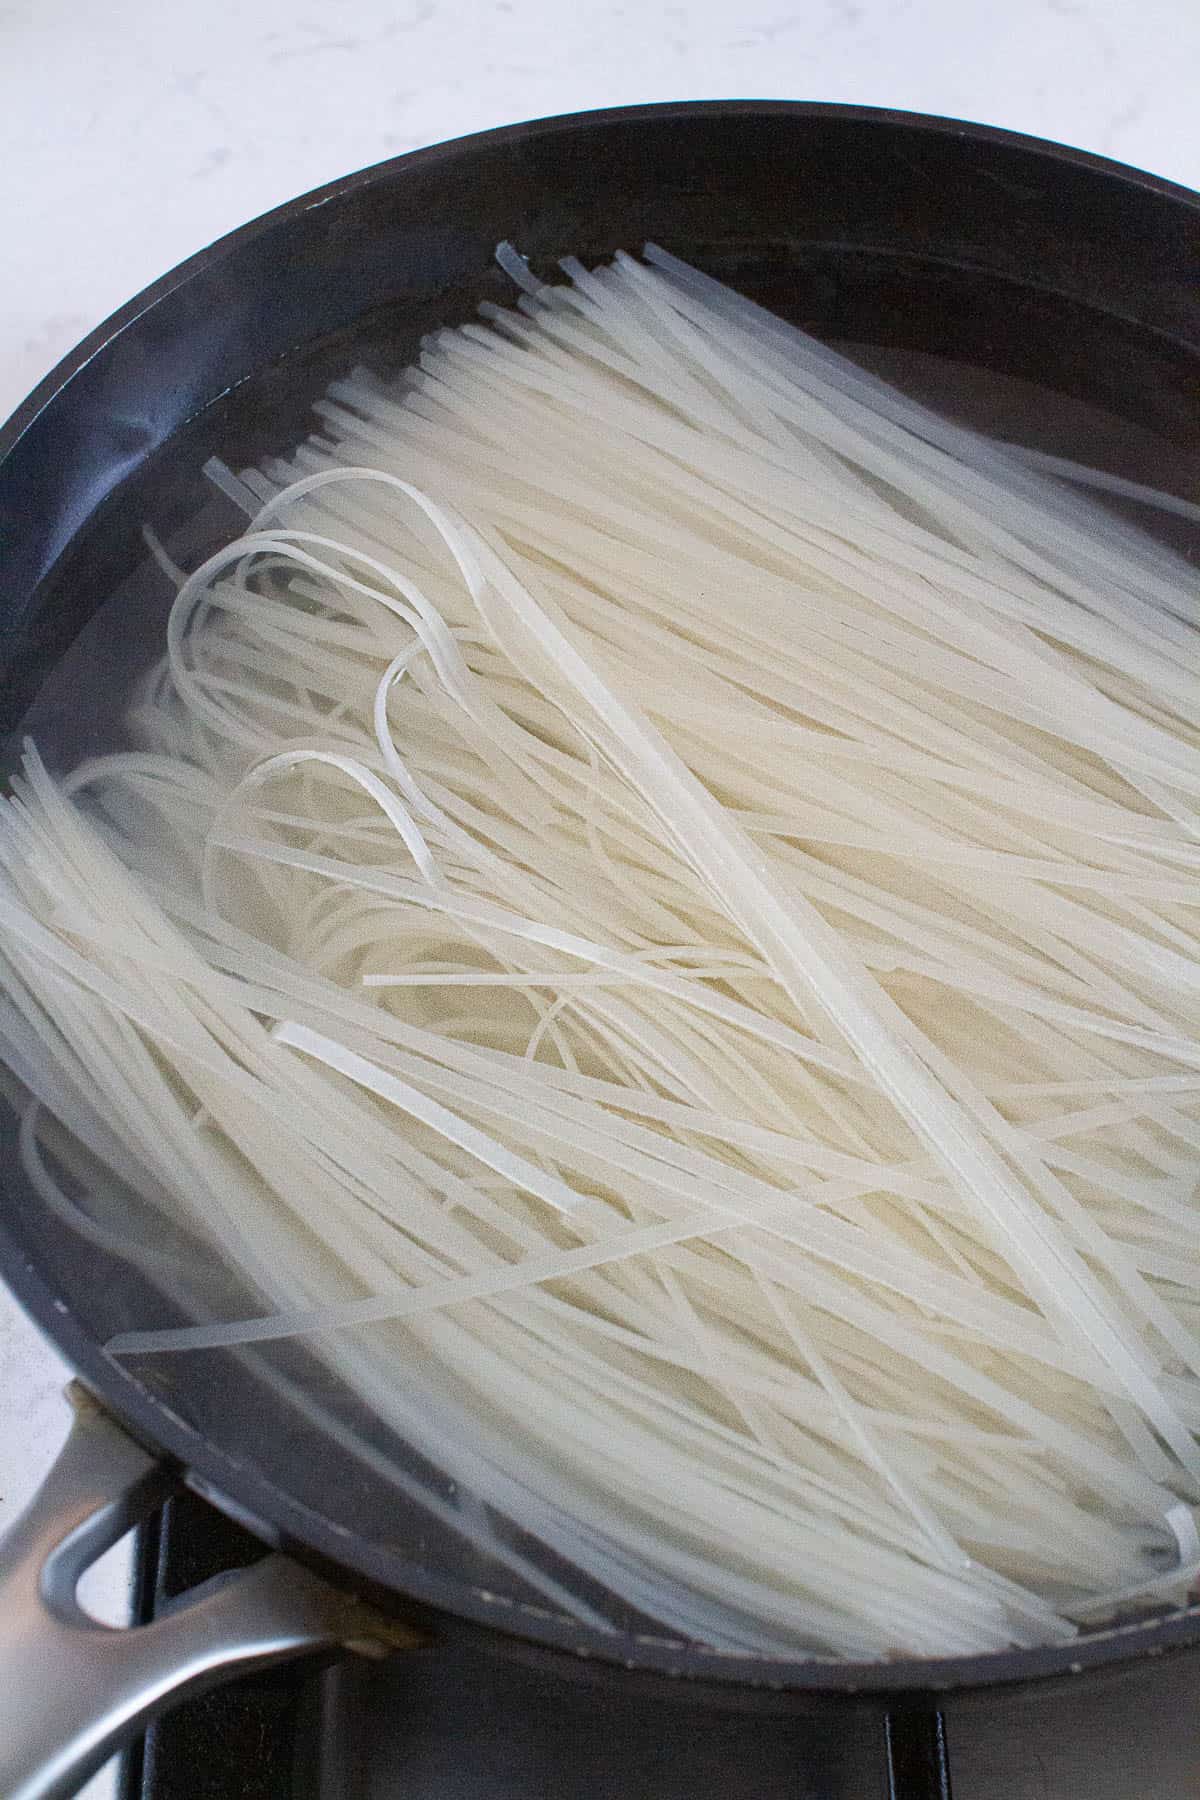 Rice noodles being boiled in hot water.